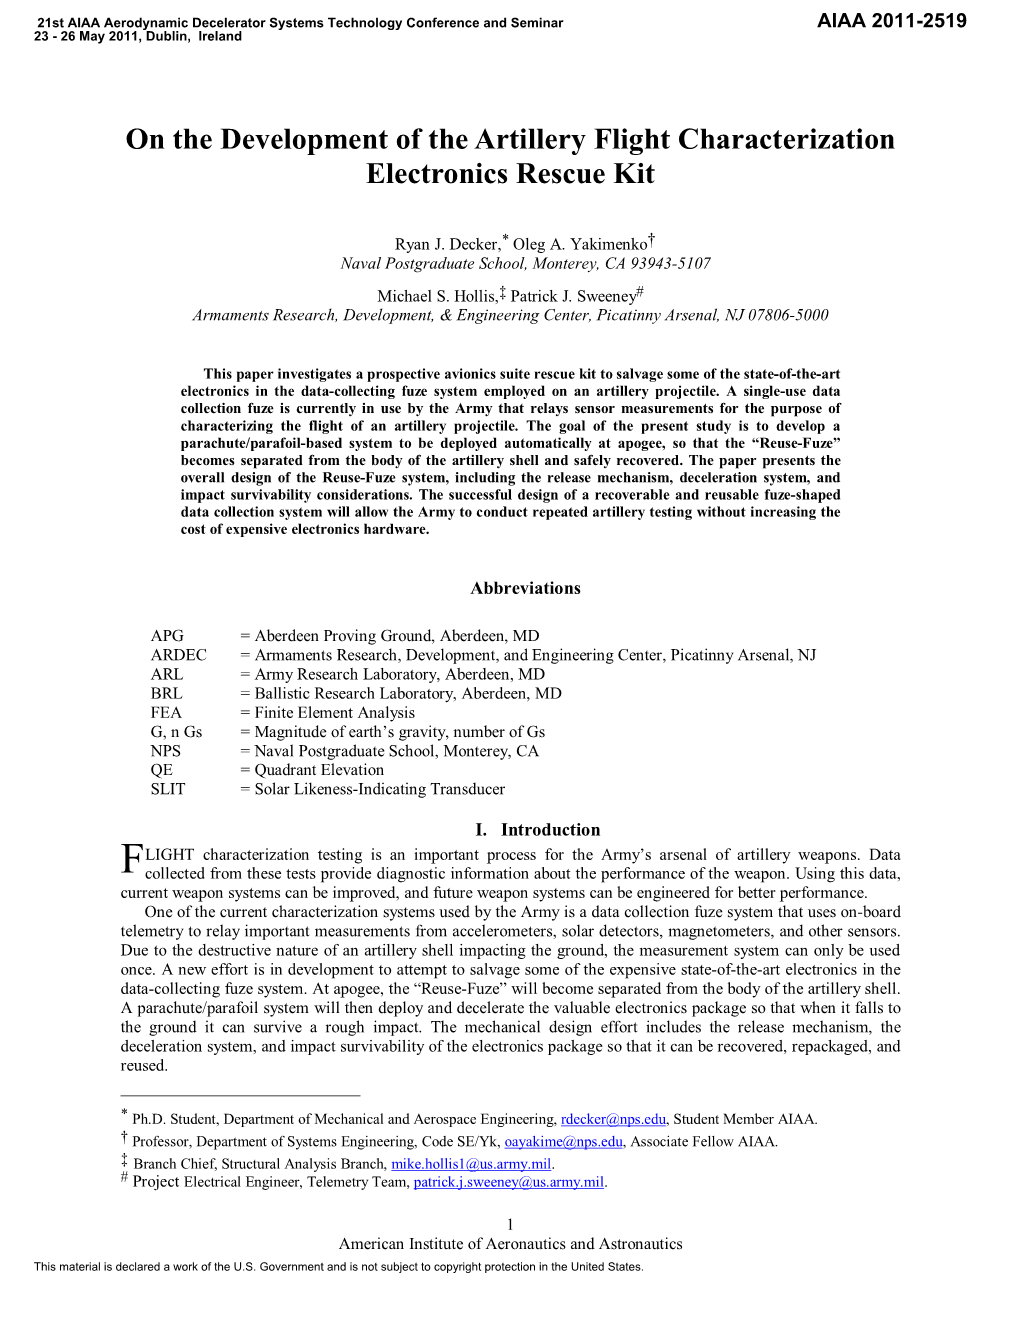 On the Development of the Artillery Flight Characterization Electronics Rescue Kit